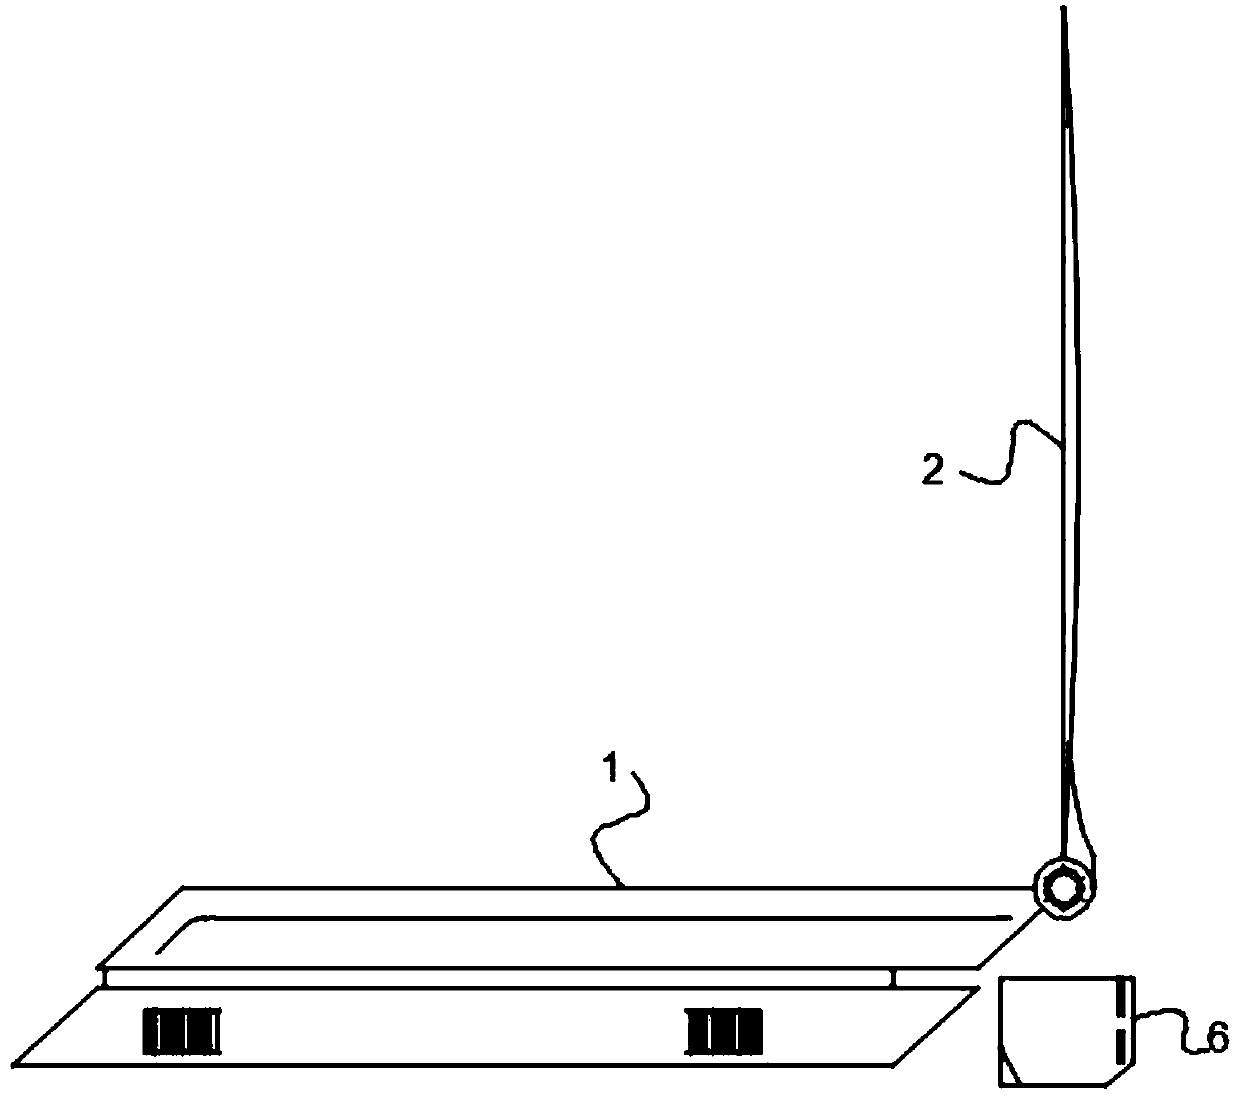 External equipment for an electronic PS4sillim and an electronic PS4PRO